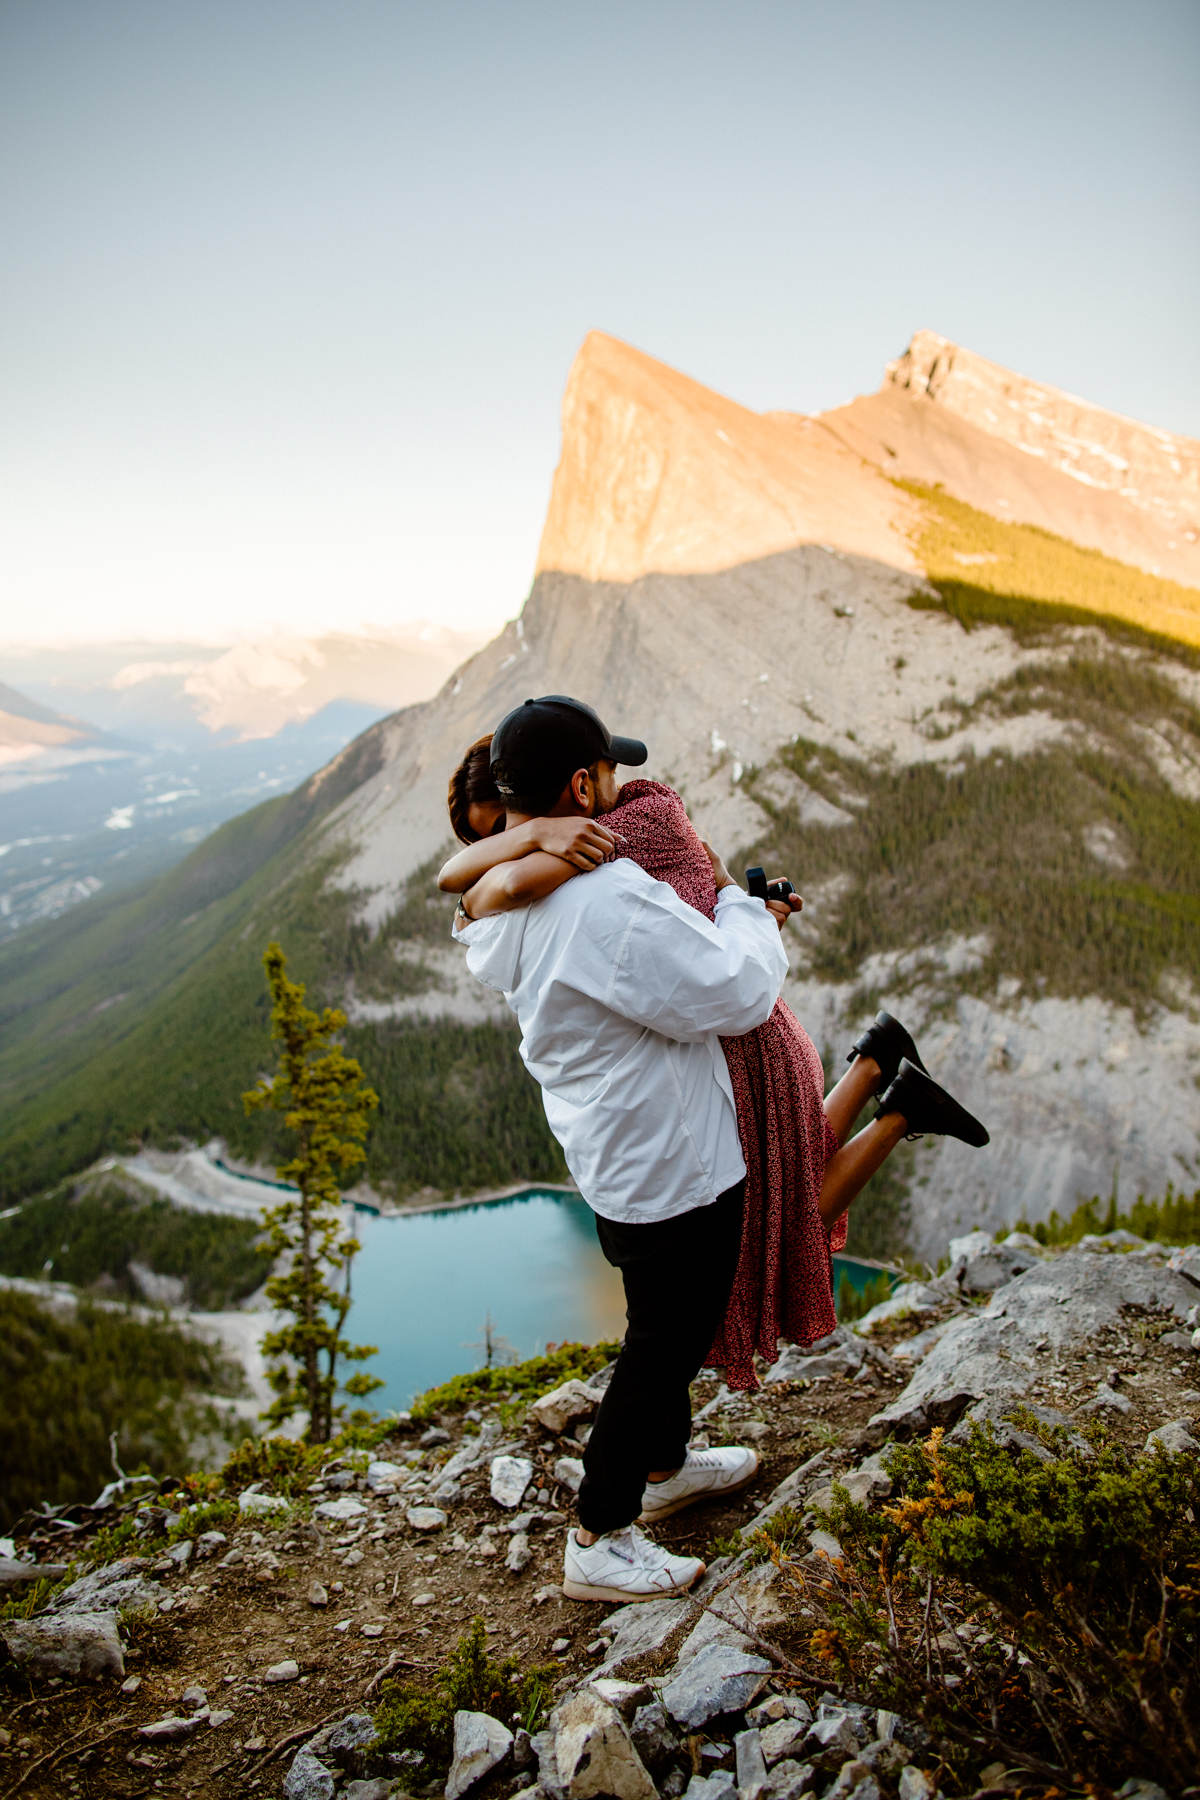 Surprise Proposal Photographers in Banff - Photo 18